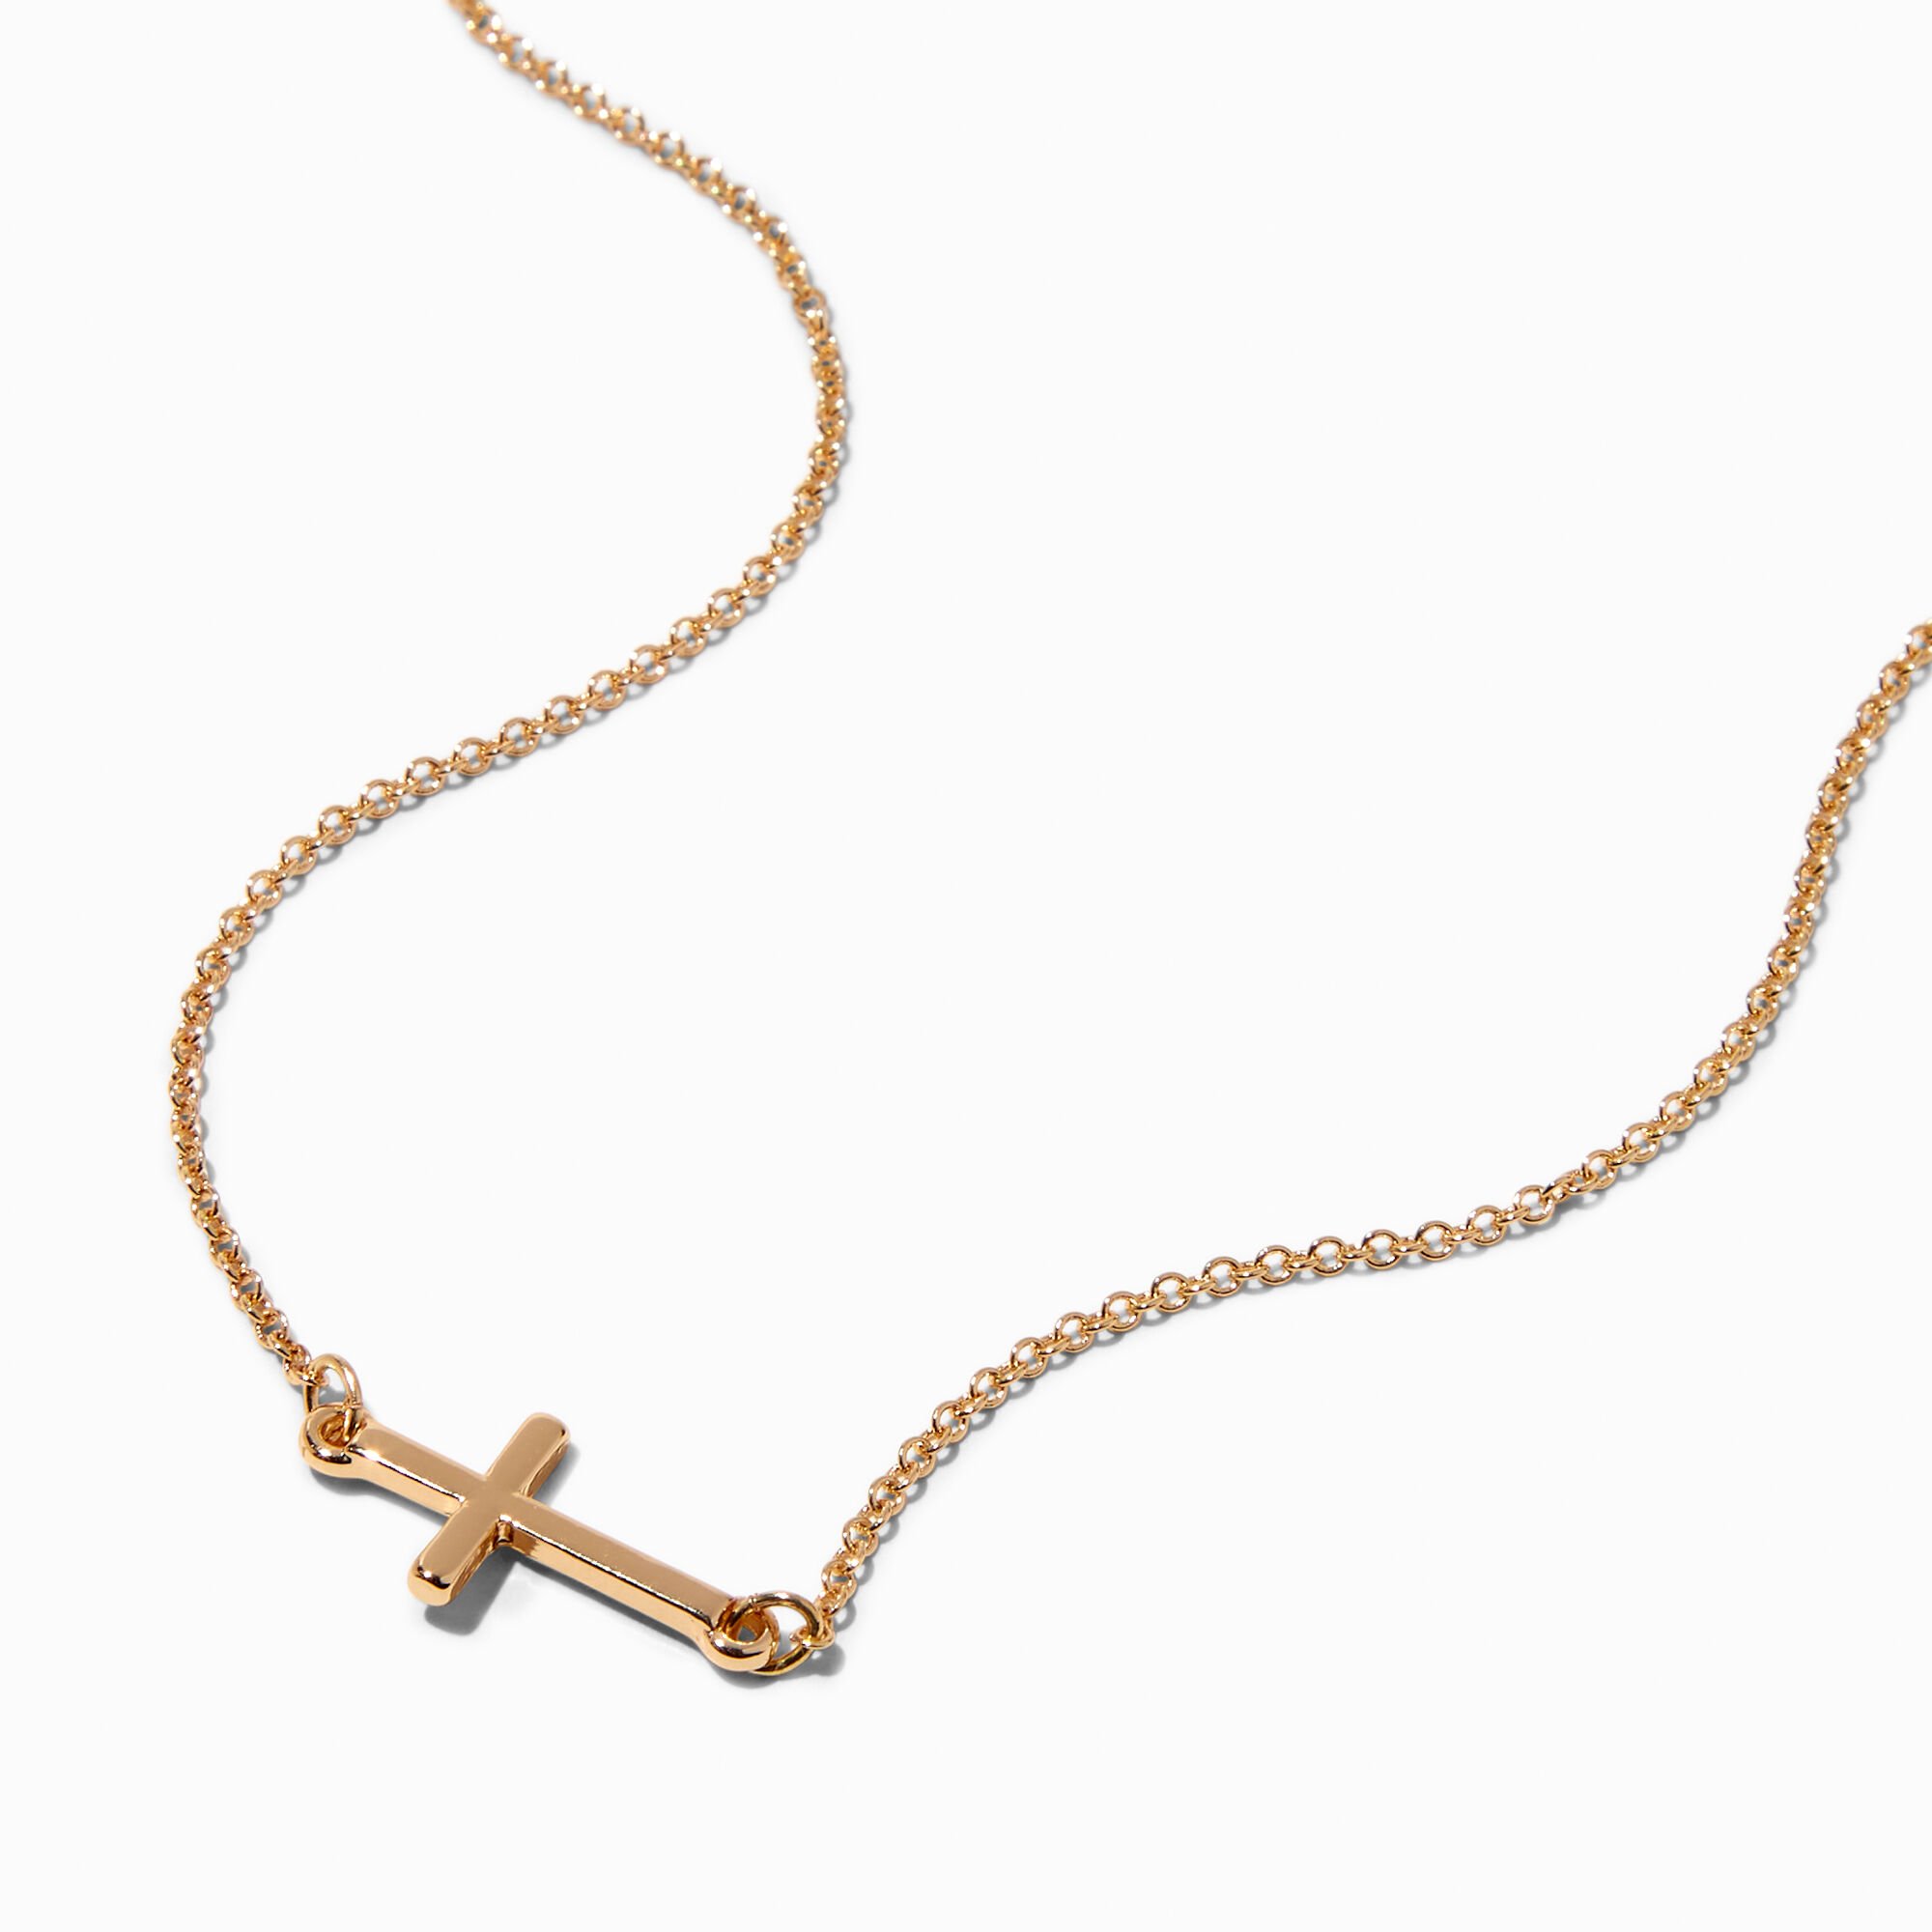 View Claires Recycled Jewelry Tone Cross Pendant Necklace Gold information